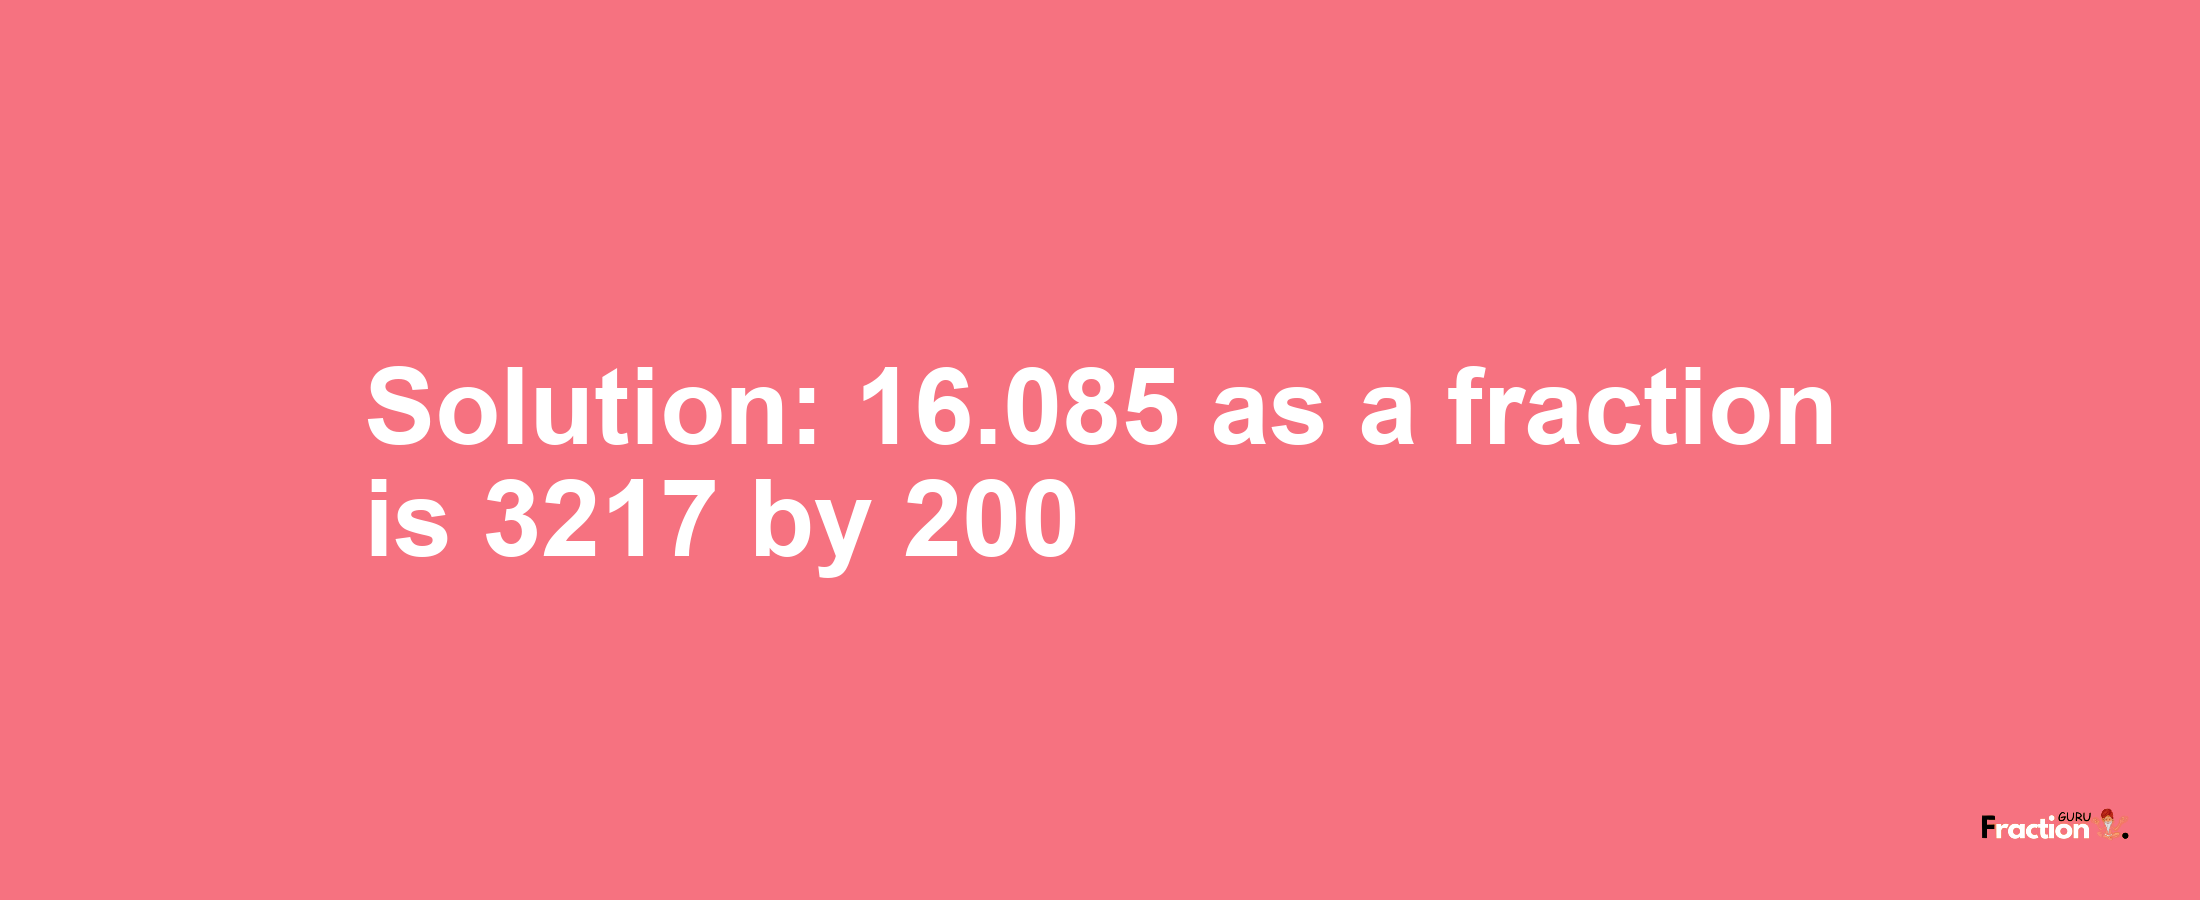 Solution:16.085 as a fraction is 3217/200